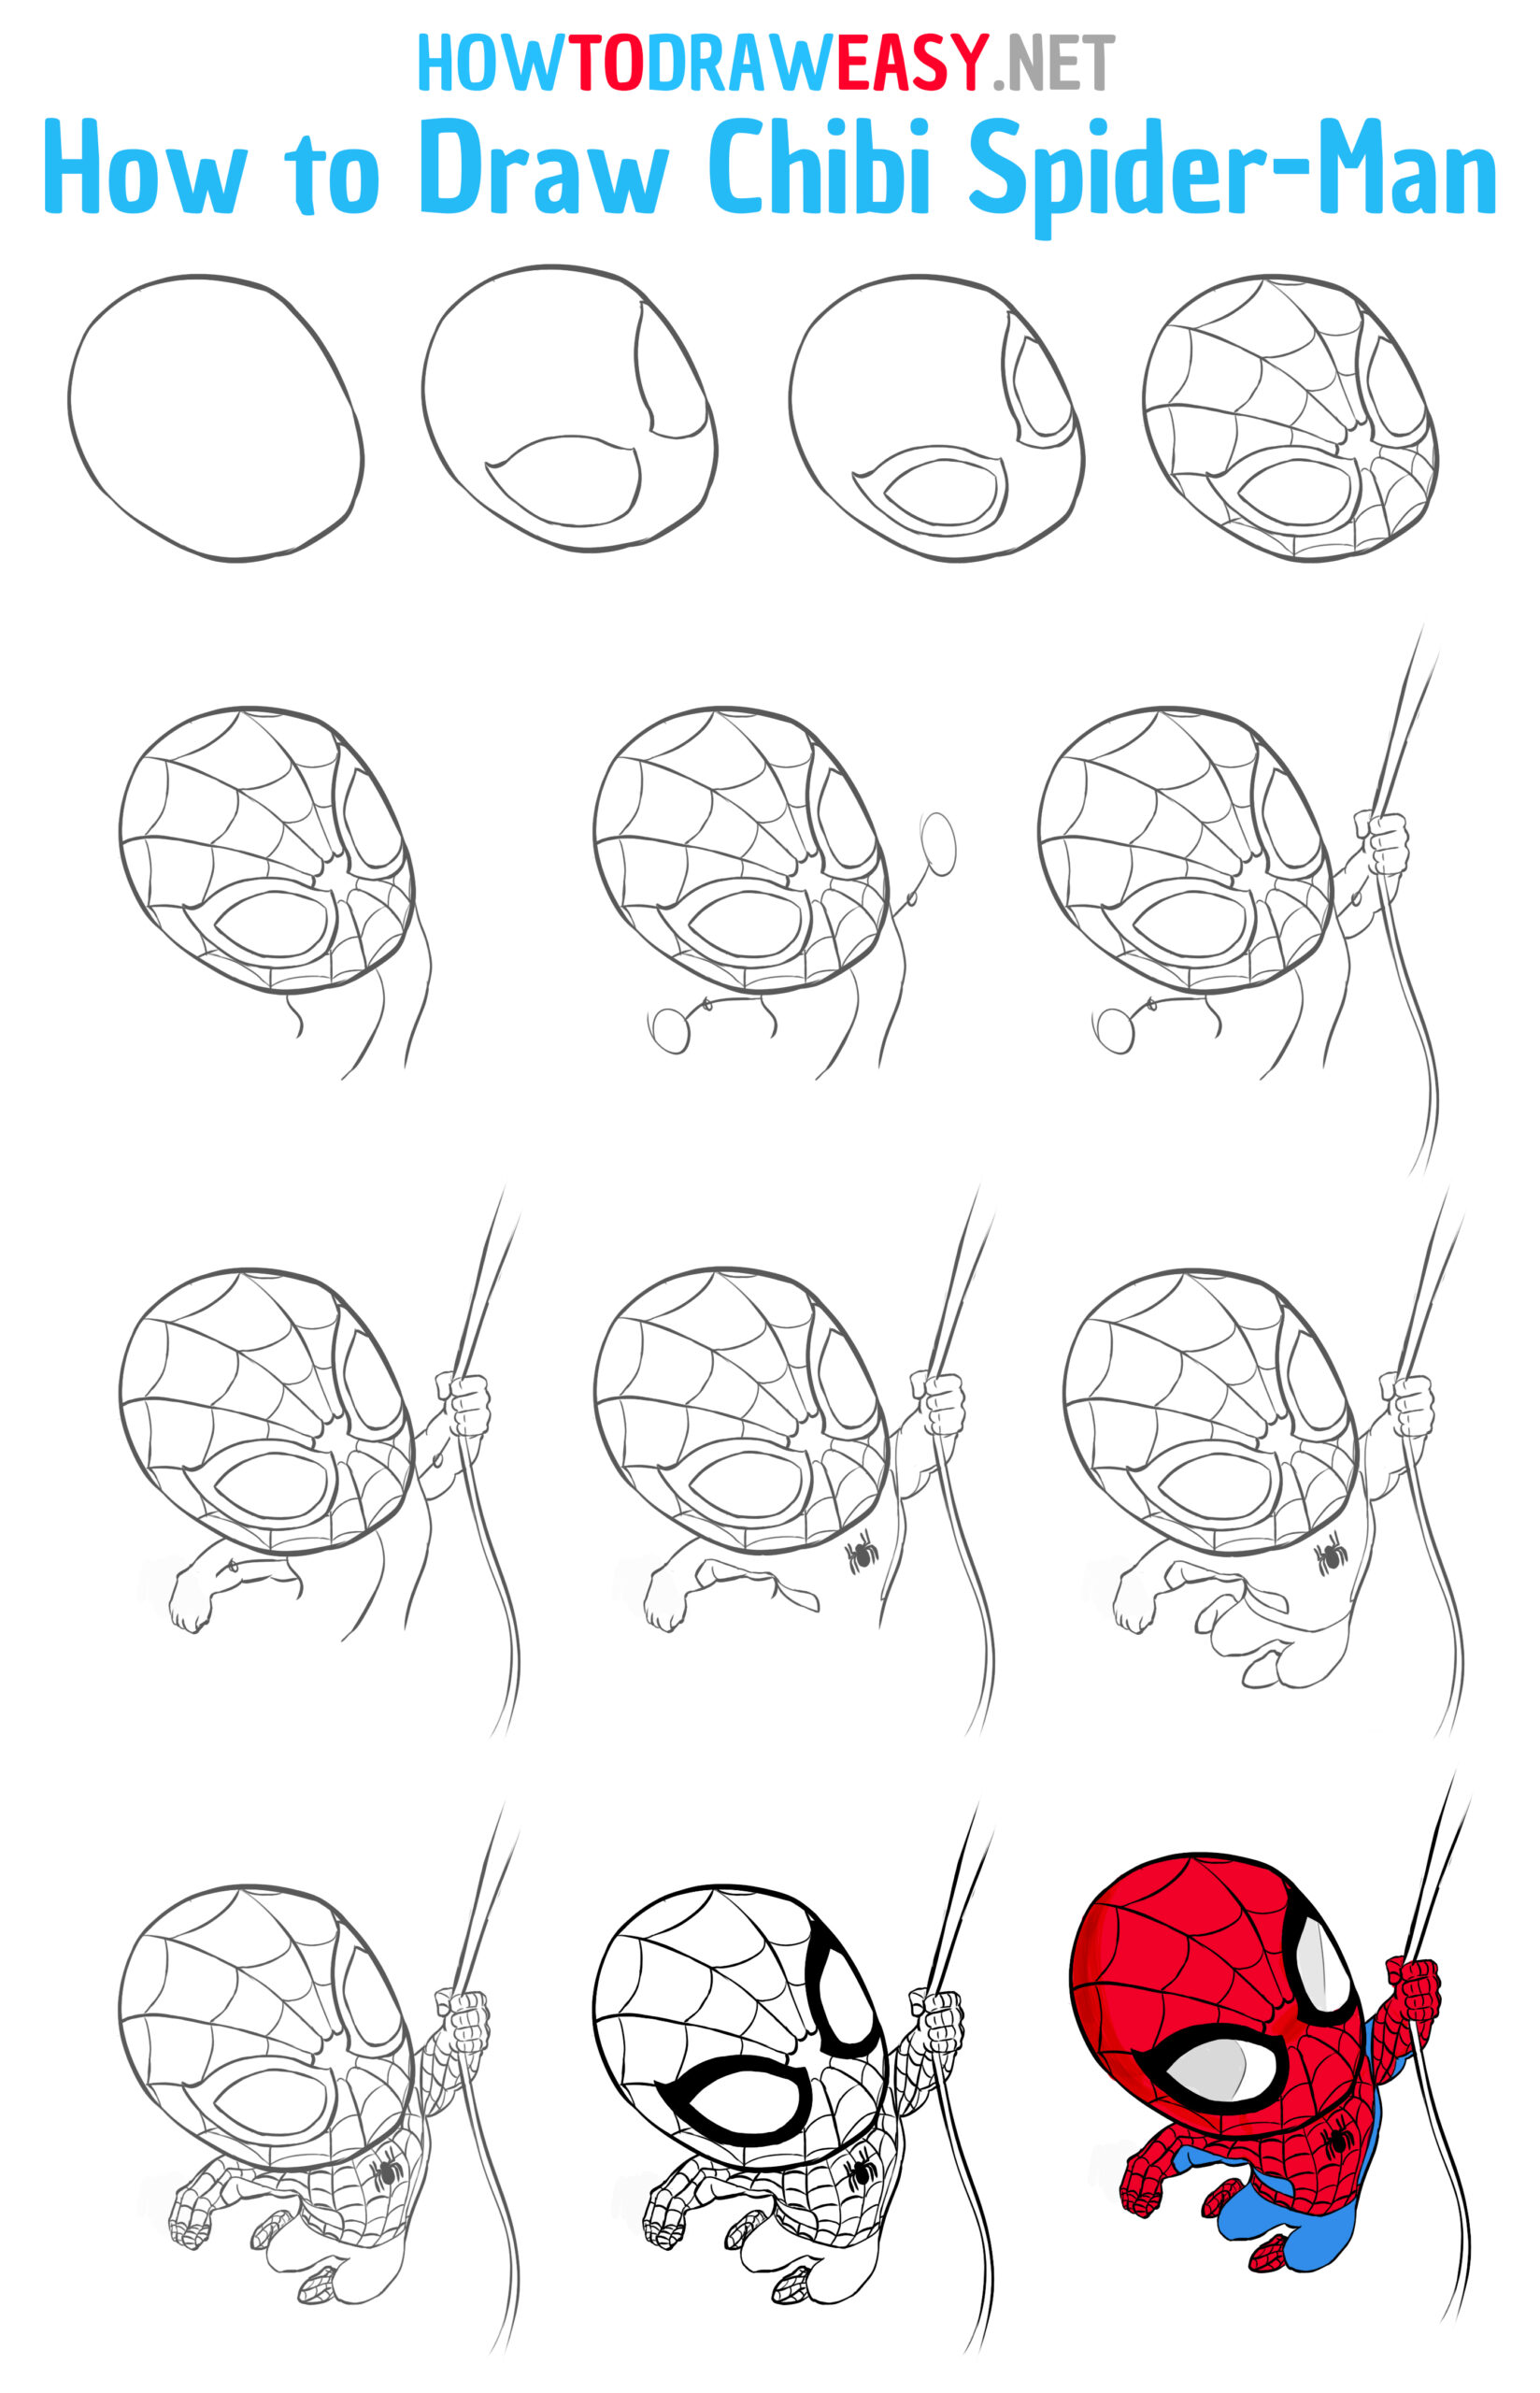 How to Draw Chibi Spider-Man Step by Step